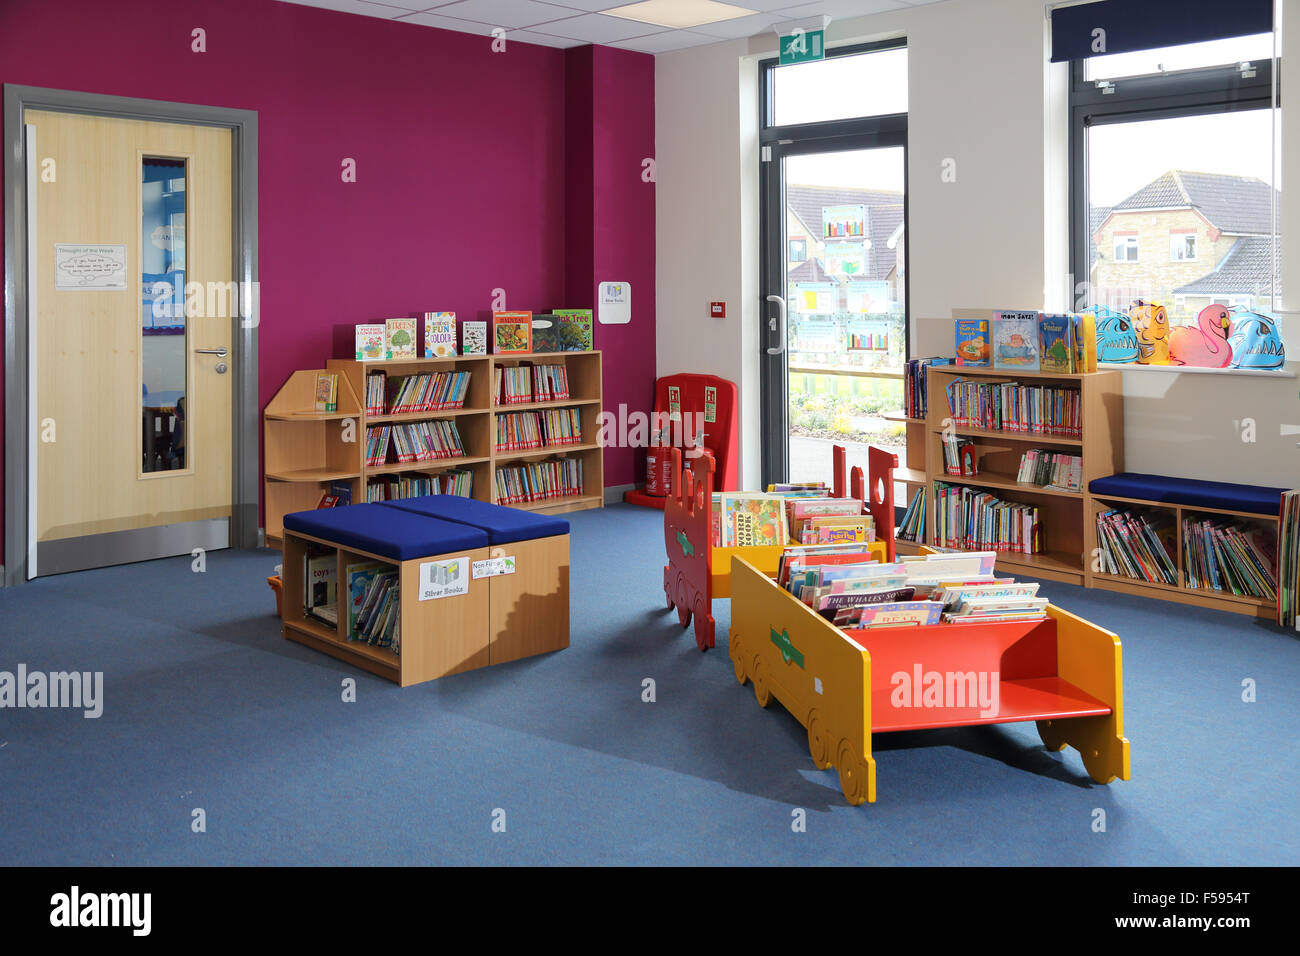 Library area in a new UK junior school showing seating and books stored in traditional book cases and a steam-train shaped table Stock Photo